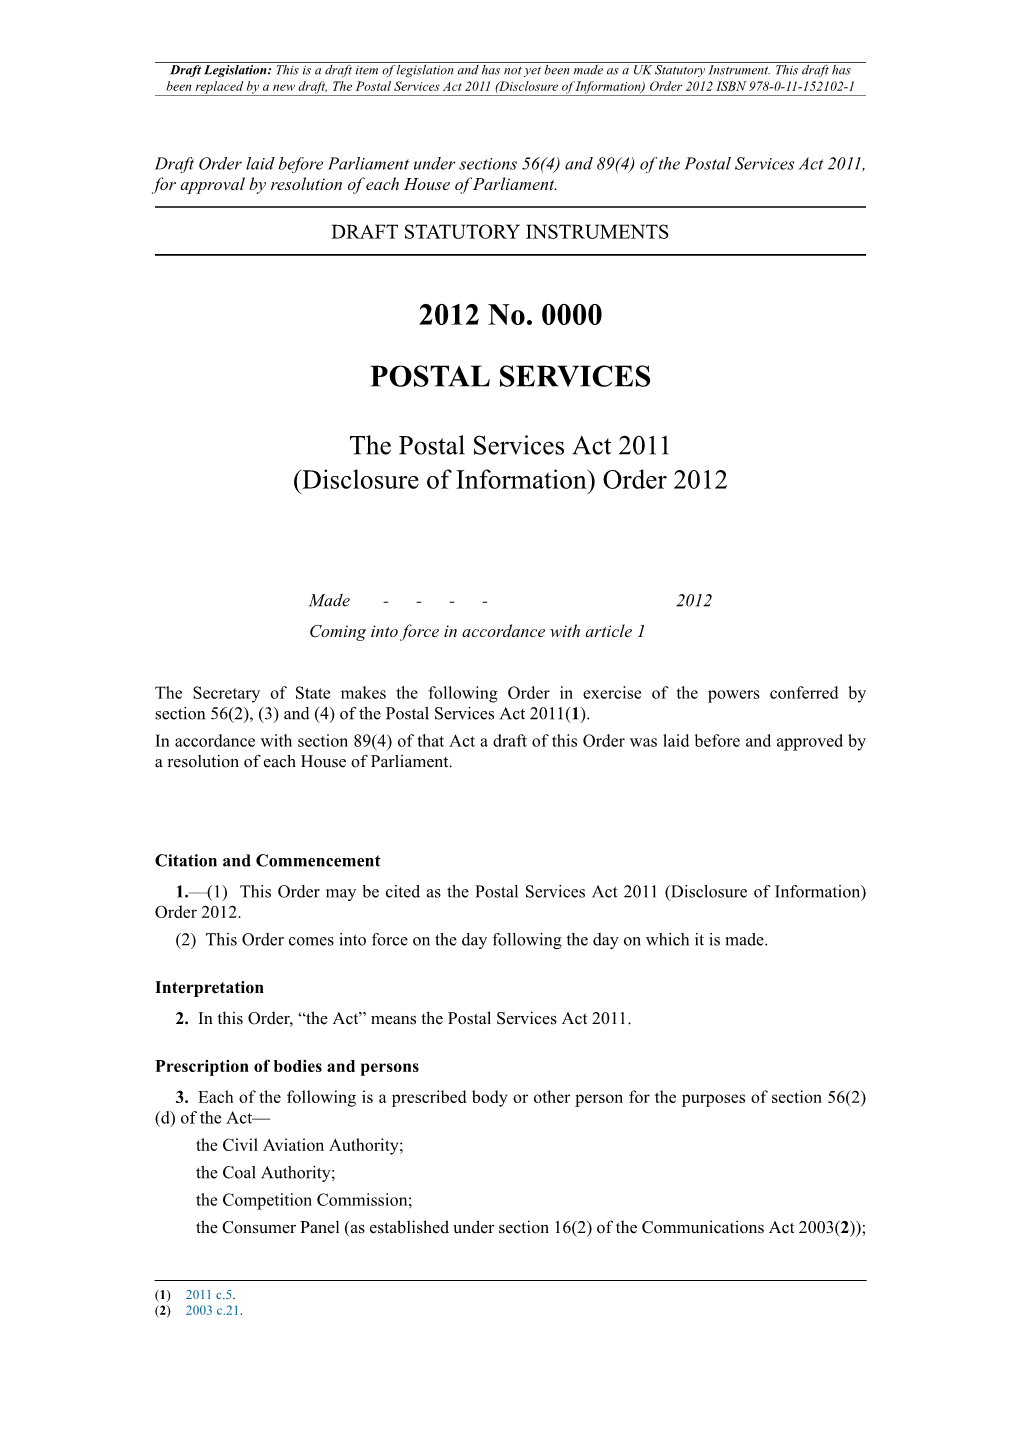 The Postal Services Act 2011 (Disclosure of Information) Order 2012 ISBN 978-0-11-152102-1